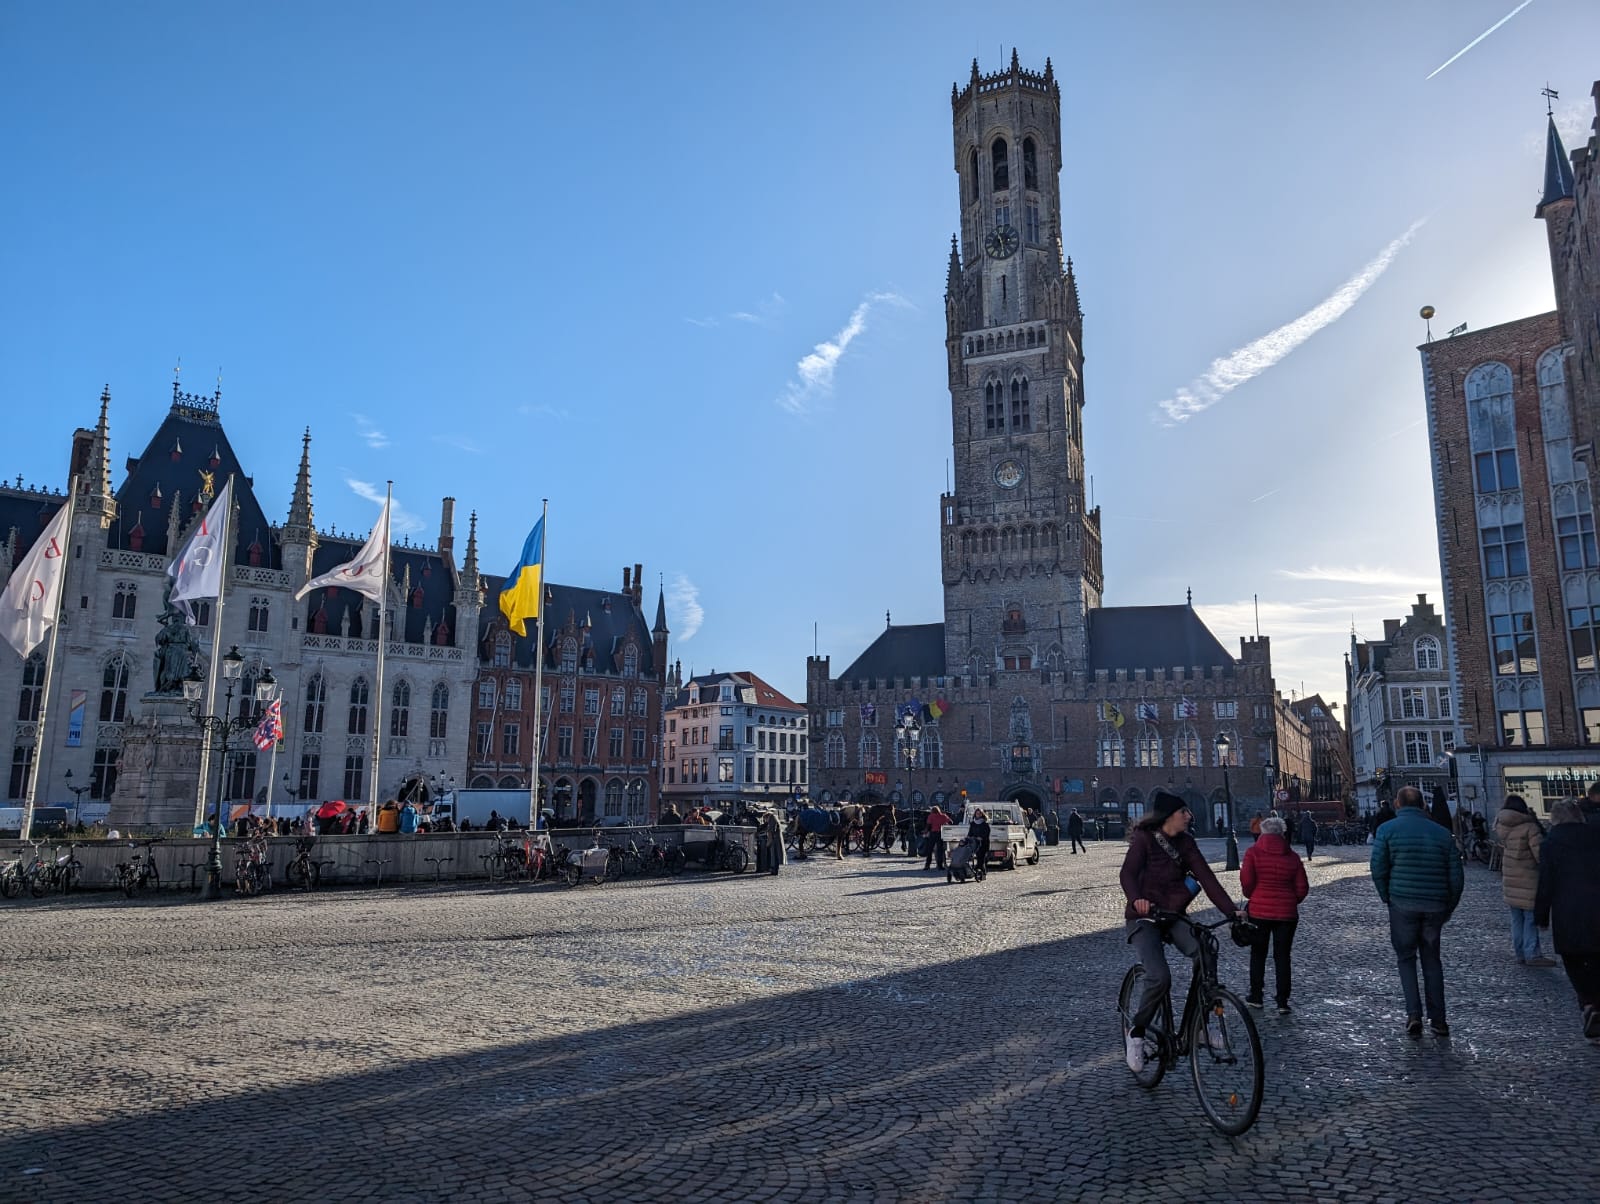 The Belfry of Bruges, a historical clock tower in the centre of the city, a fun activity to do during your 2 days in Belgium.